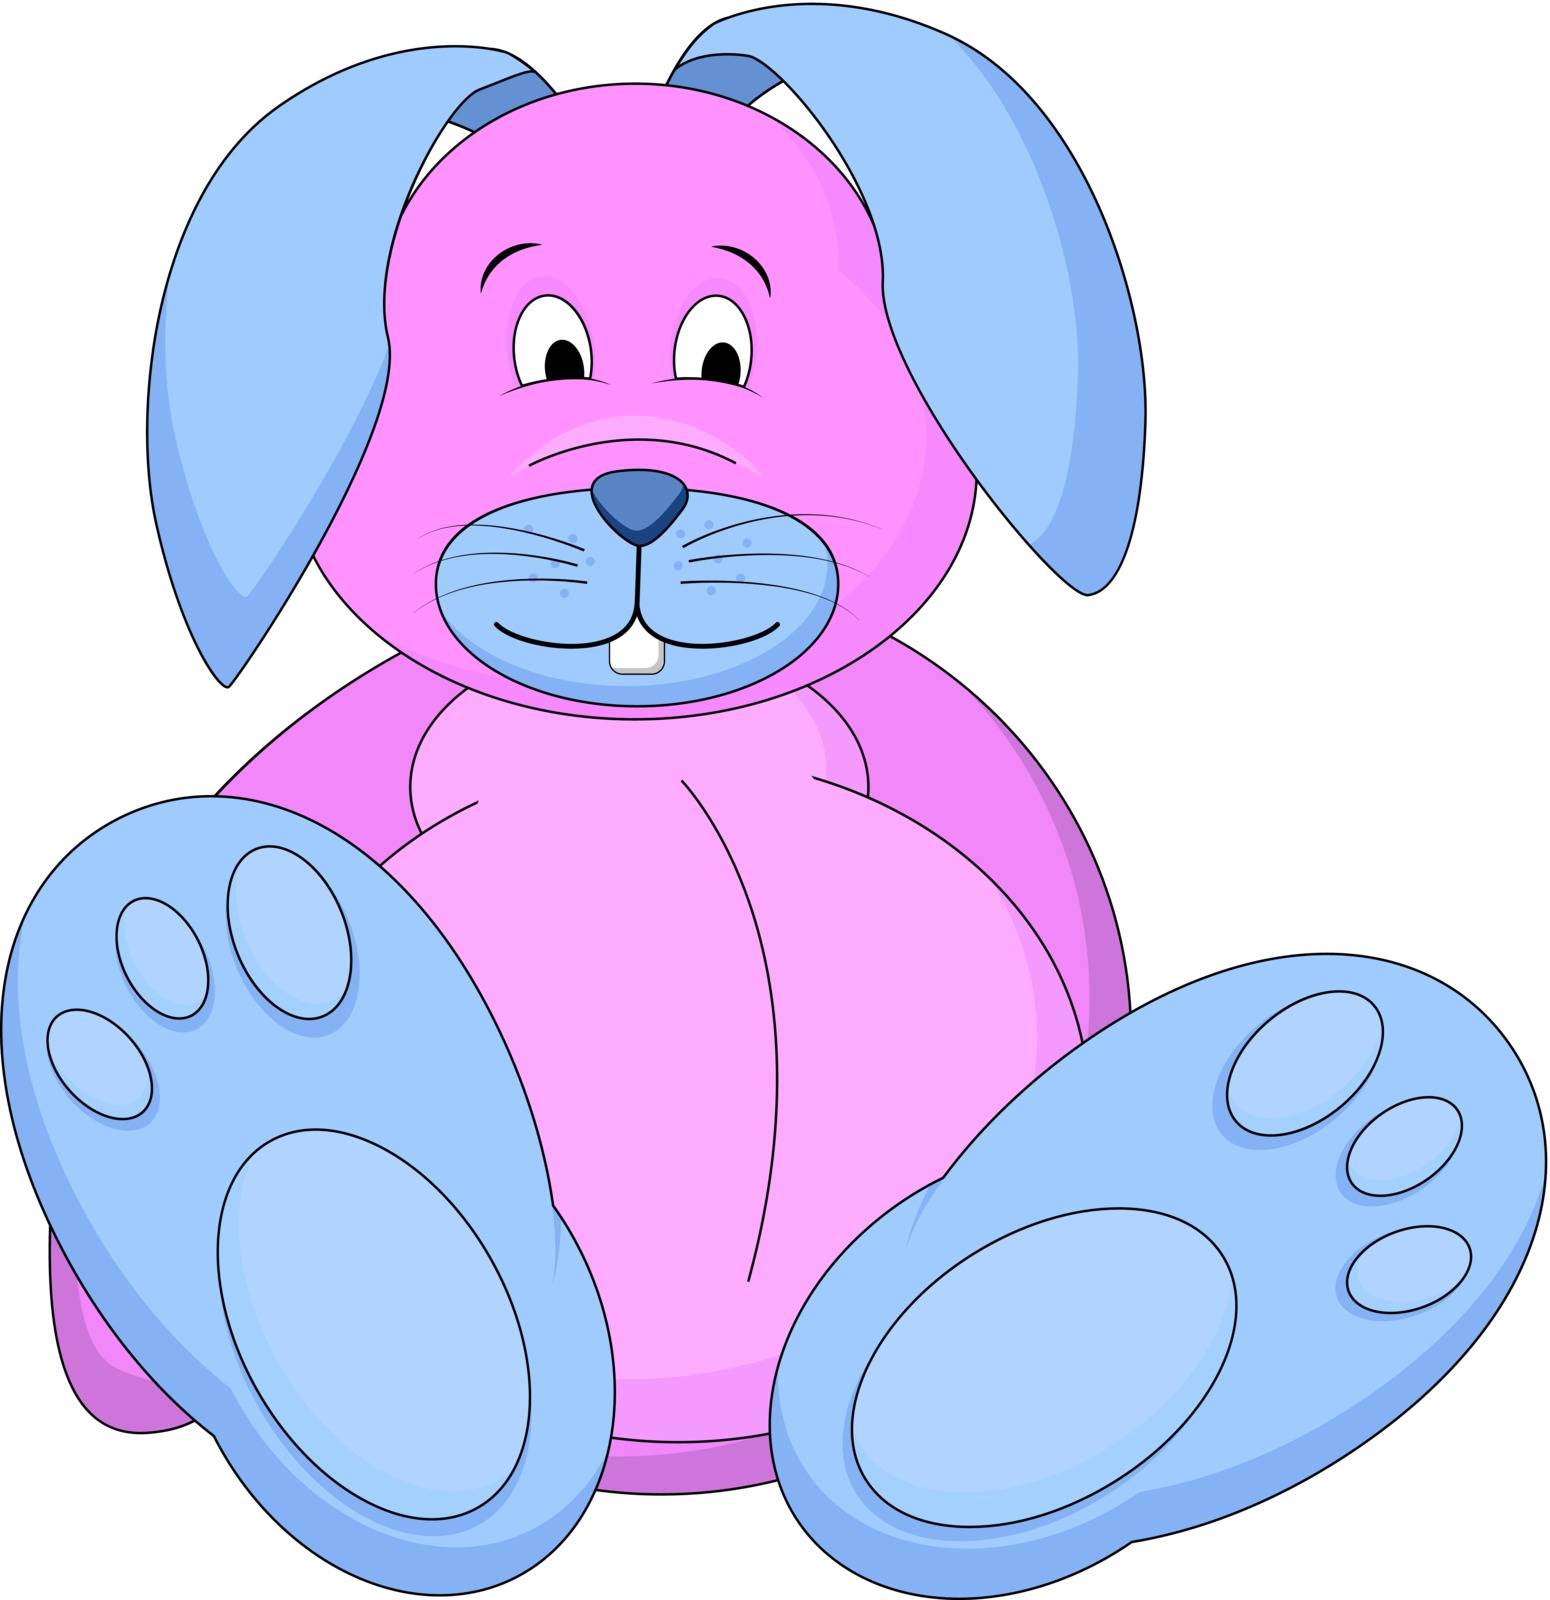 A cure vector pink and blue bunny, in editable illustration file.